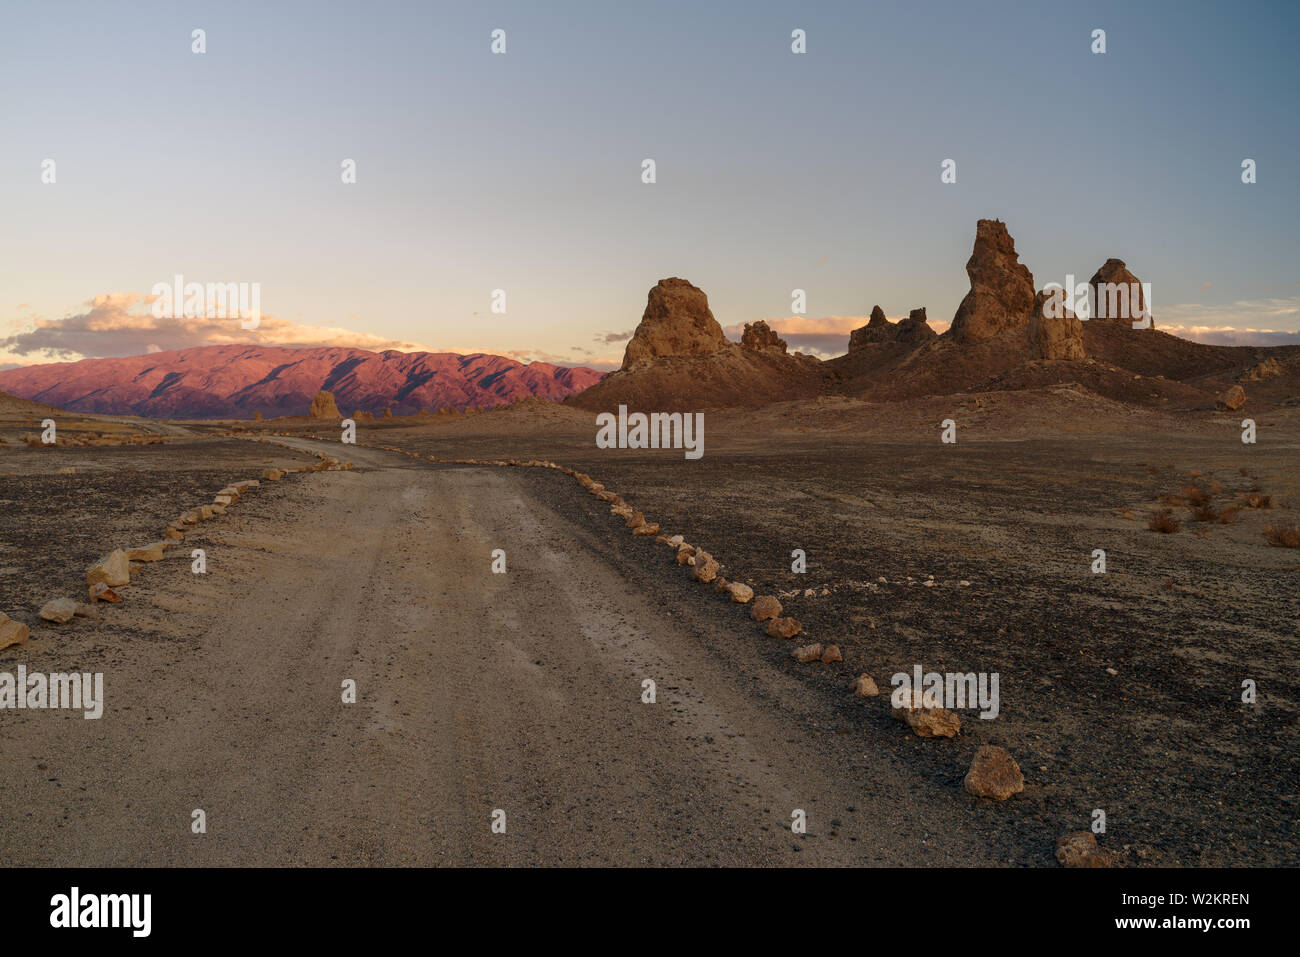 Image of the famous Trona Pinnacles, an unusual geological feature in the California Desert National Conservation Area. Stock Photo